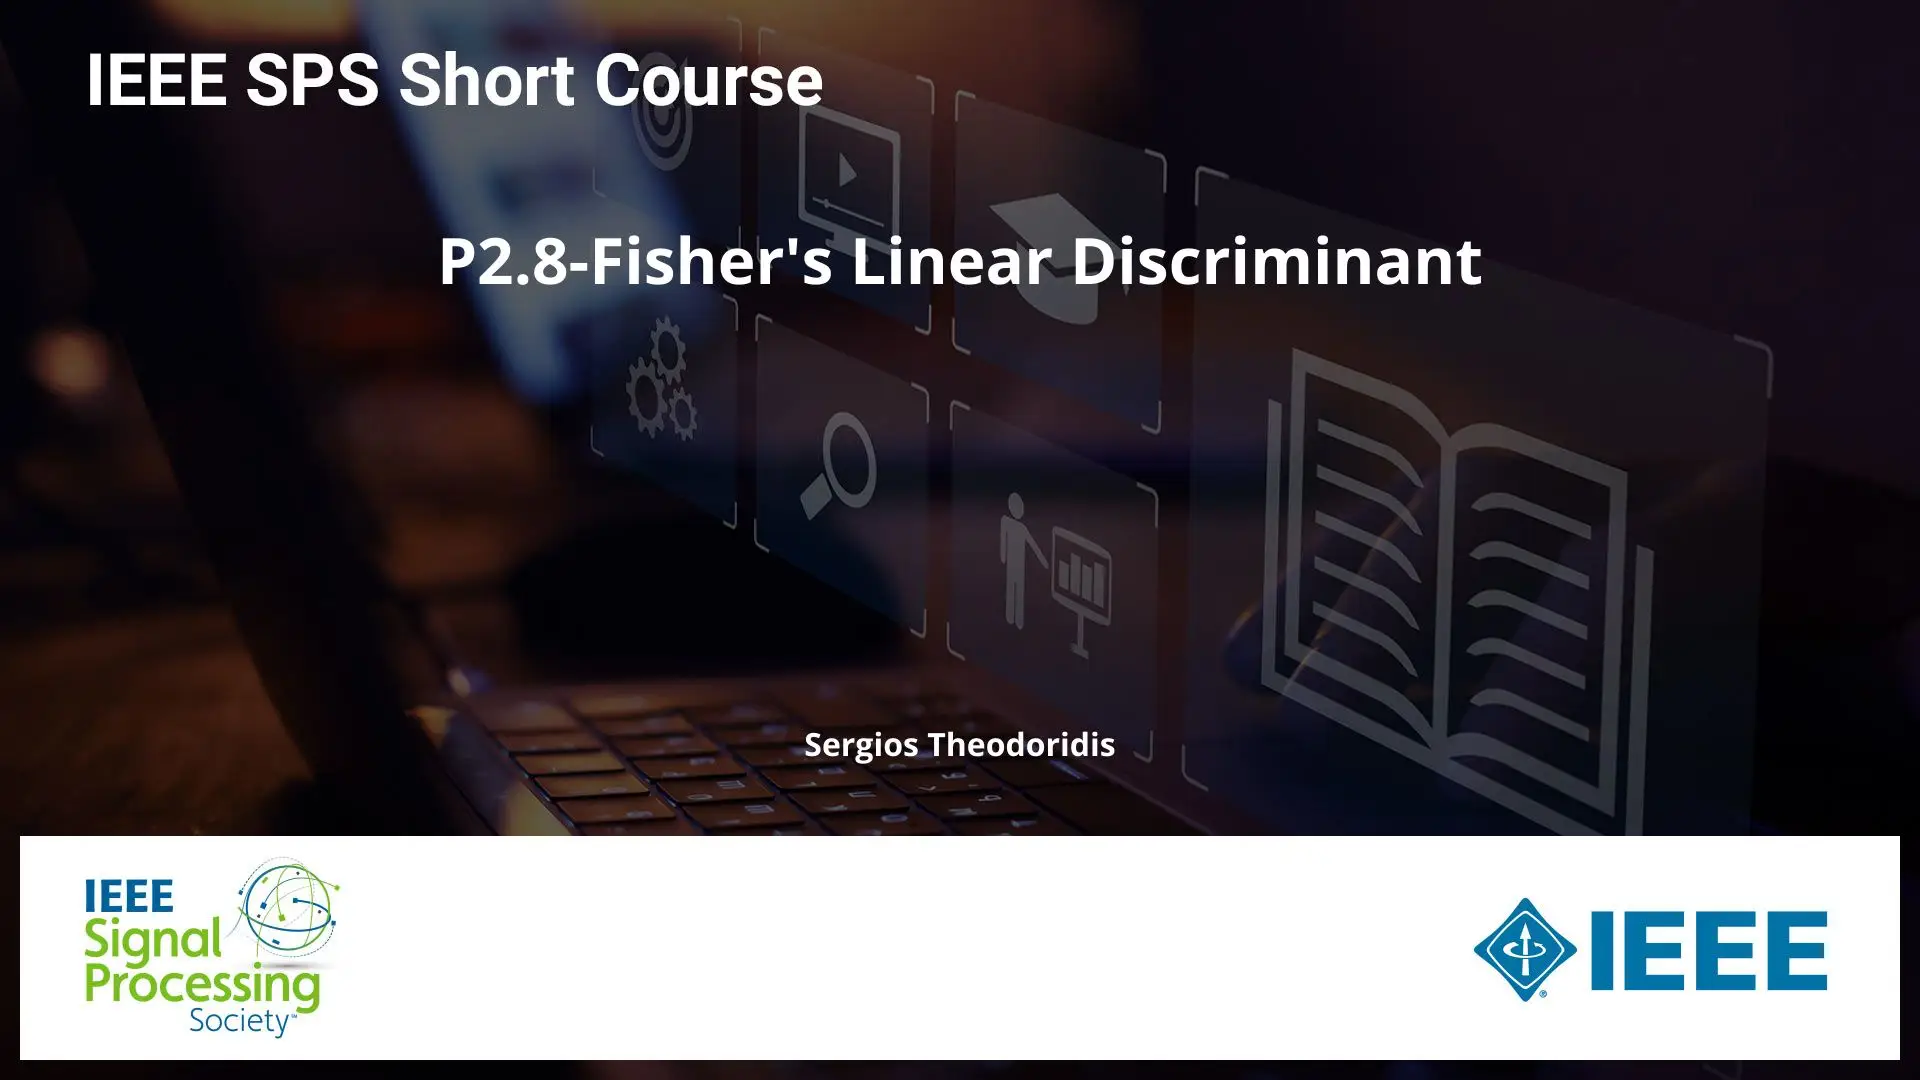 P2.8-Fisher's Linear Discriminant